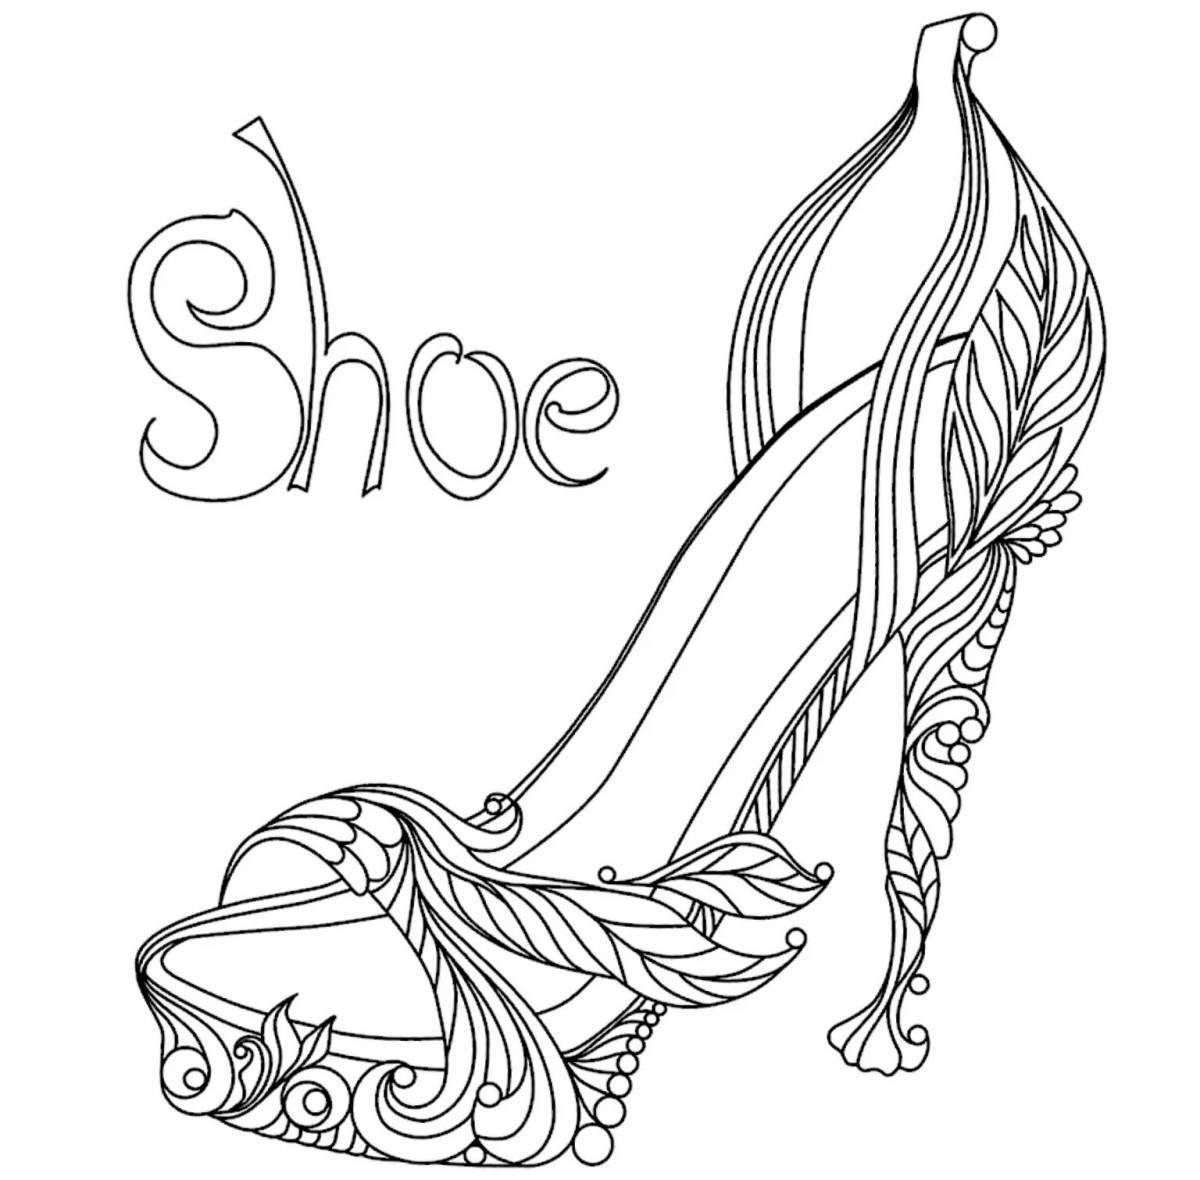 Coloring page adorable shoes